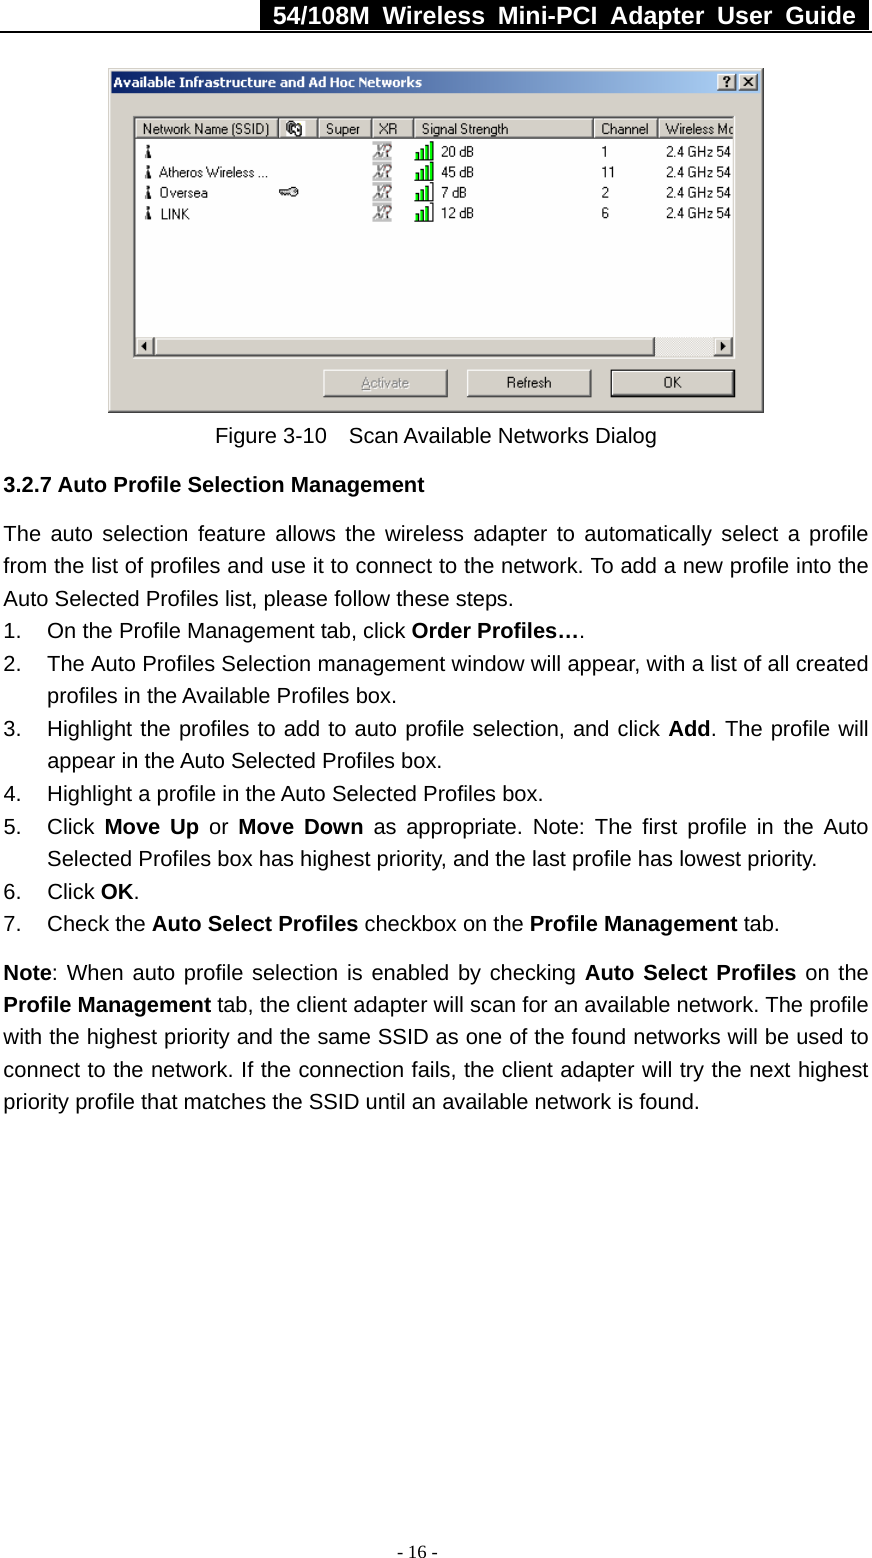   54/108M Wireless Mini-PCI Adapter User Guide  - 16 -  Figure 3-10    Scan Available Networks Dialog 3.2.7 Auto Profile Selection Management The auto selection feature allows the wireless adapter to automatically select a profile from the list of profiles and use it to connect to the network. To add a new profile into the Auto Selected Profiles list, please follow these steps. 1.  On the Profile Management tab, click Order Profiles…. 2.  The Auto Profiles Selection management window will appear, with a list of all created profiles in the Available Profiles box. 3.  Highlight the profiles to add to auto profile selection, and click Add. The profile will appear in the Auto Selected Profiles box. 4.  Highlight a profile in the Auto Selected Profiles box. 5. Click Move Up or Move Down as appropriate. Note: The first profile in the Auto Selected Profiles box has highest priority, and the last profile has lowest priority. 6. Click OK. 7. Check the Auto Select Profiles checkbox on the Profile Management tab. Note: When auto profile selection is enabled by checking Auto Select Profiles on the Profile Management tab, the client adapter will scan for an available network. The profile with the highest priority and the same SSID as one of the found networks will be used to connect to the network. If the connection fails, the client adapter will try the next highest priority profile that matches the SSID until an available network is found. 